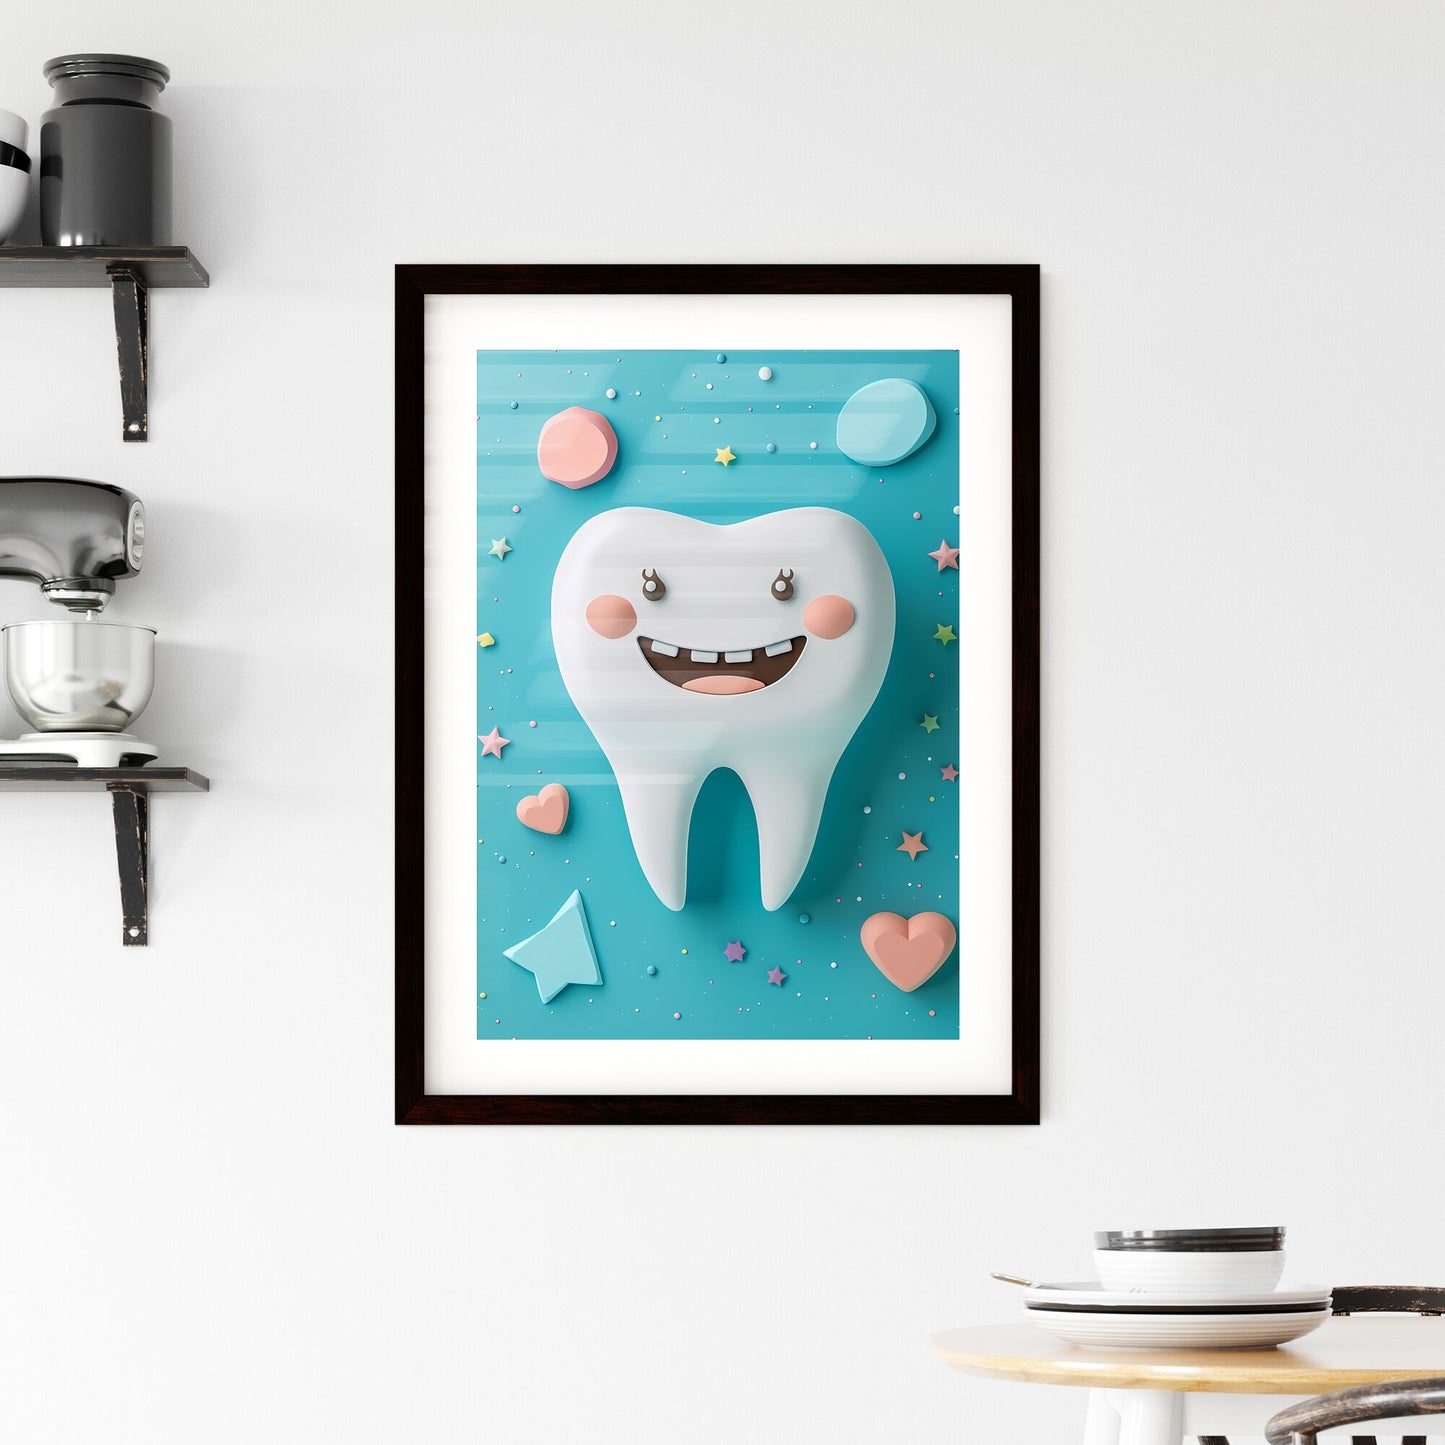 World Health Day Dental Tourism Social Media Campaign Poster with Cartoon Tooth Graphic for Health, Trust, and Beauty Default Title